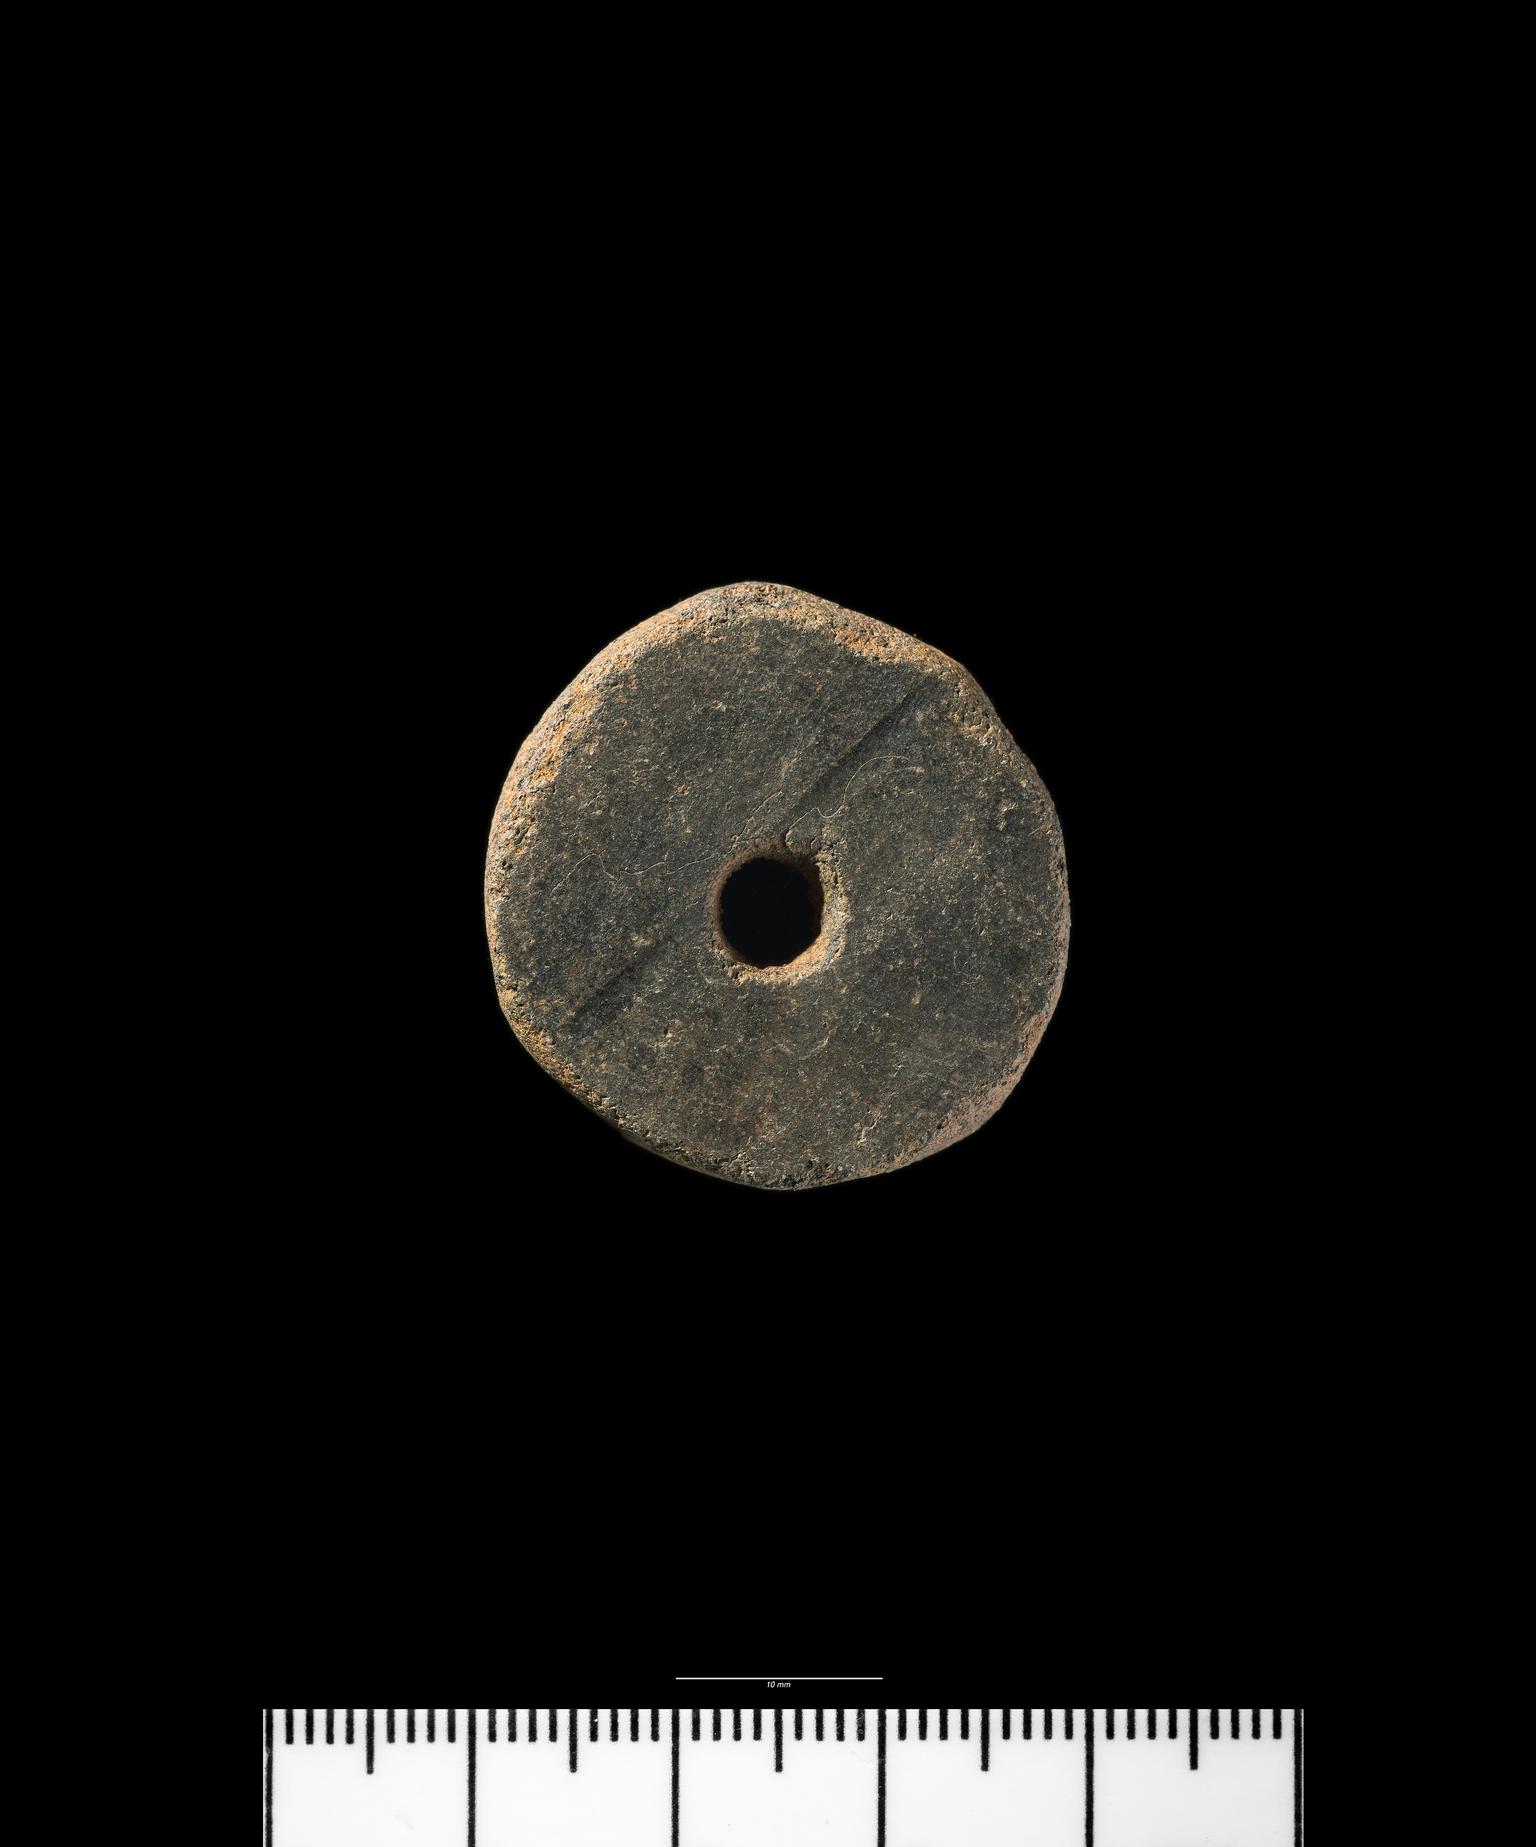 Roman pottery spindle whorl